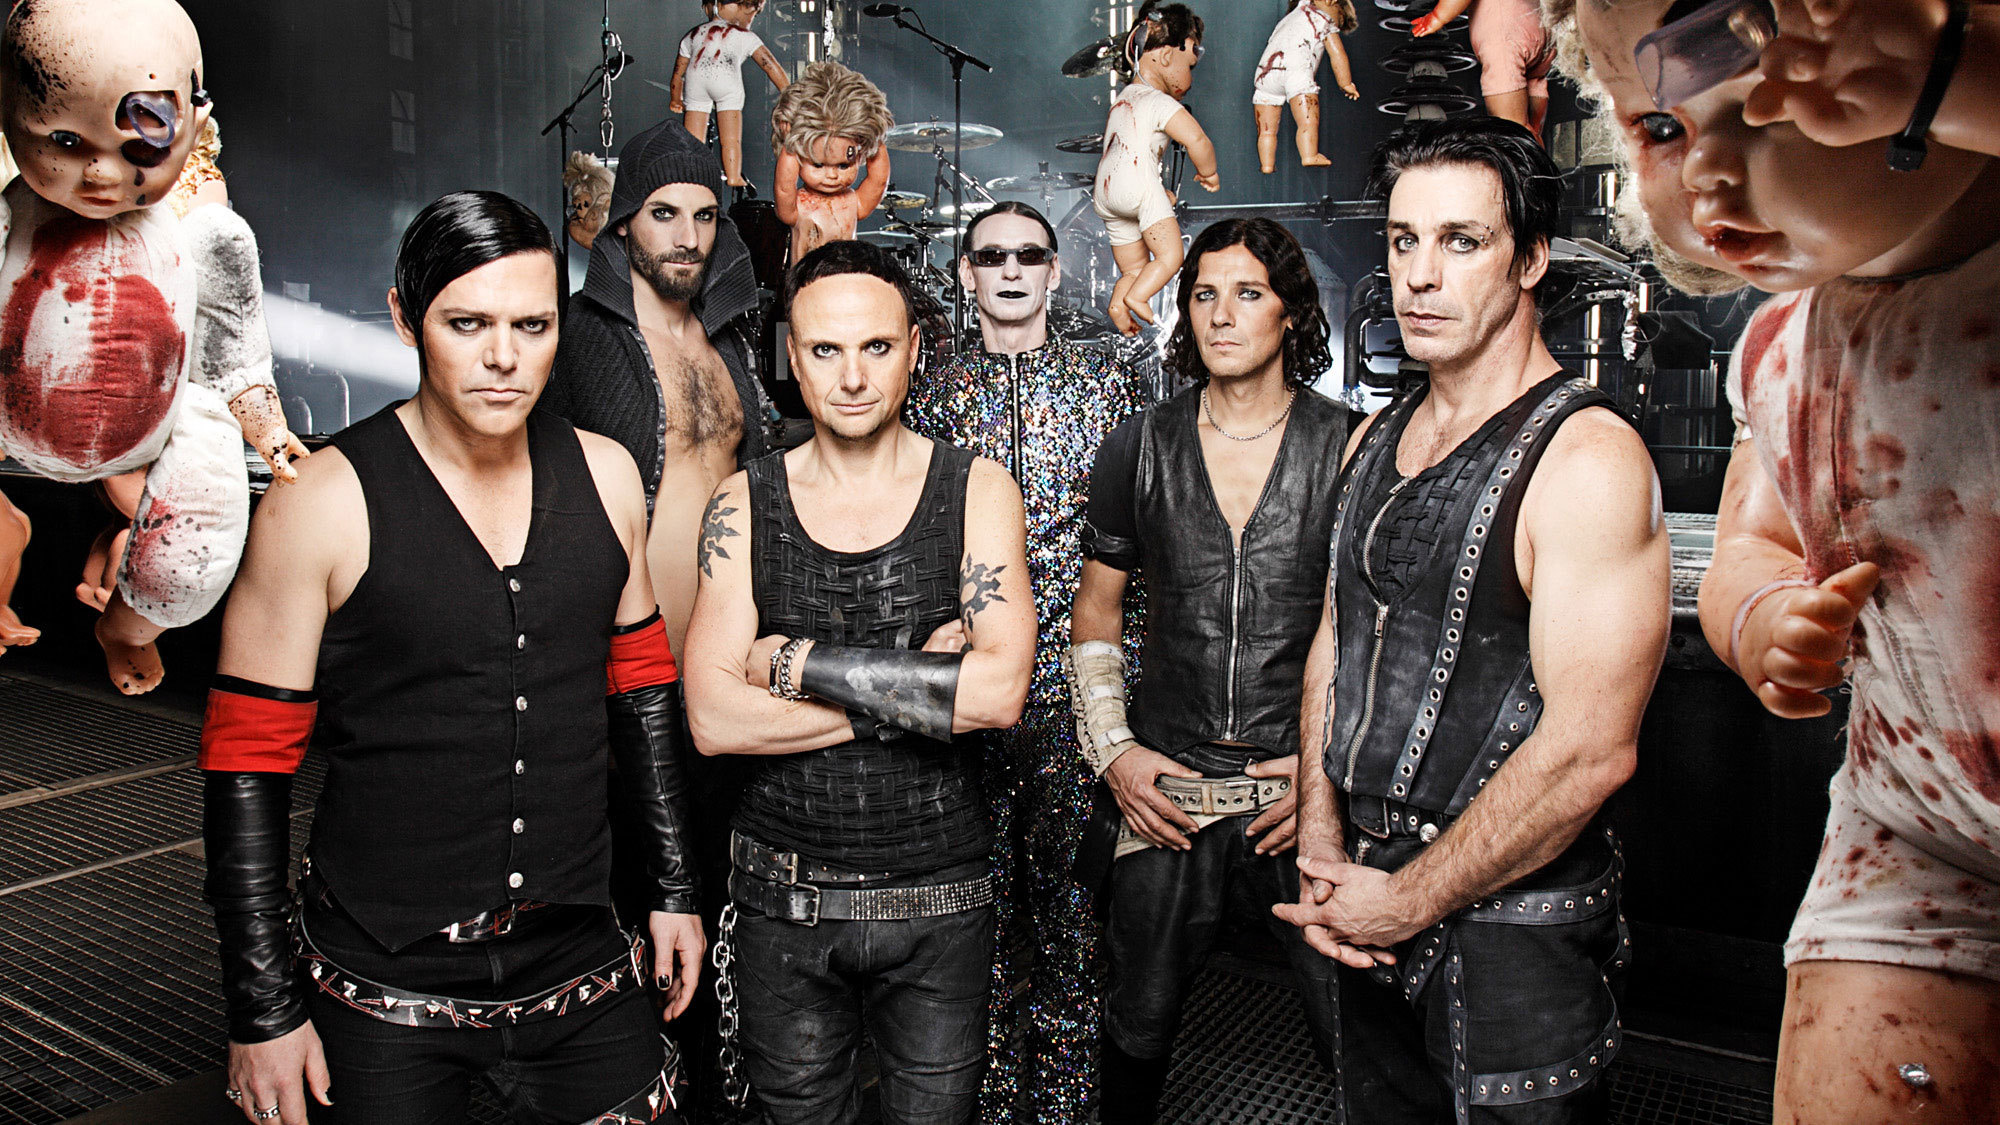 Rammstein: The group formed in 1993 by six men who grew up in East Germany. 2000x1130 HD Wallpaper.